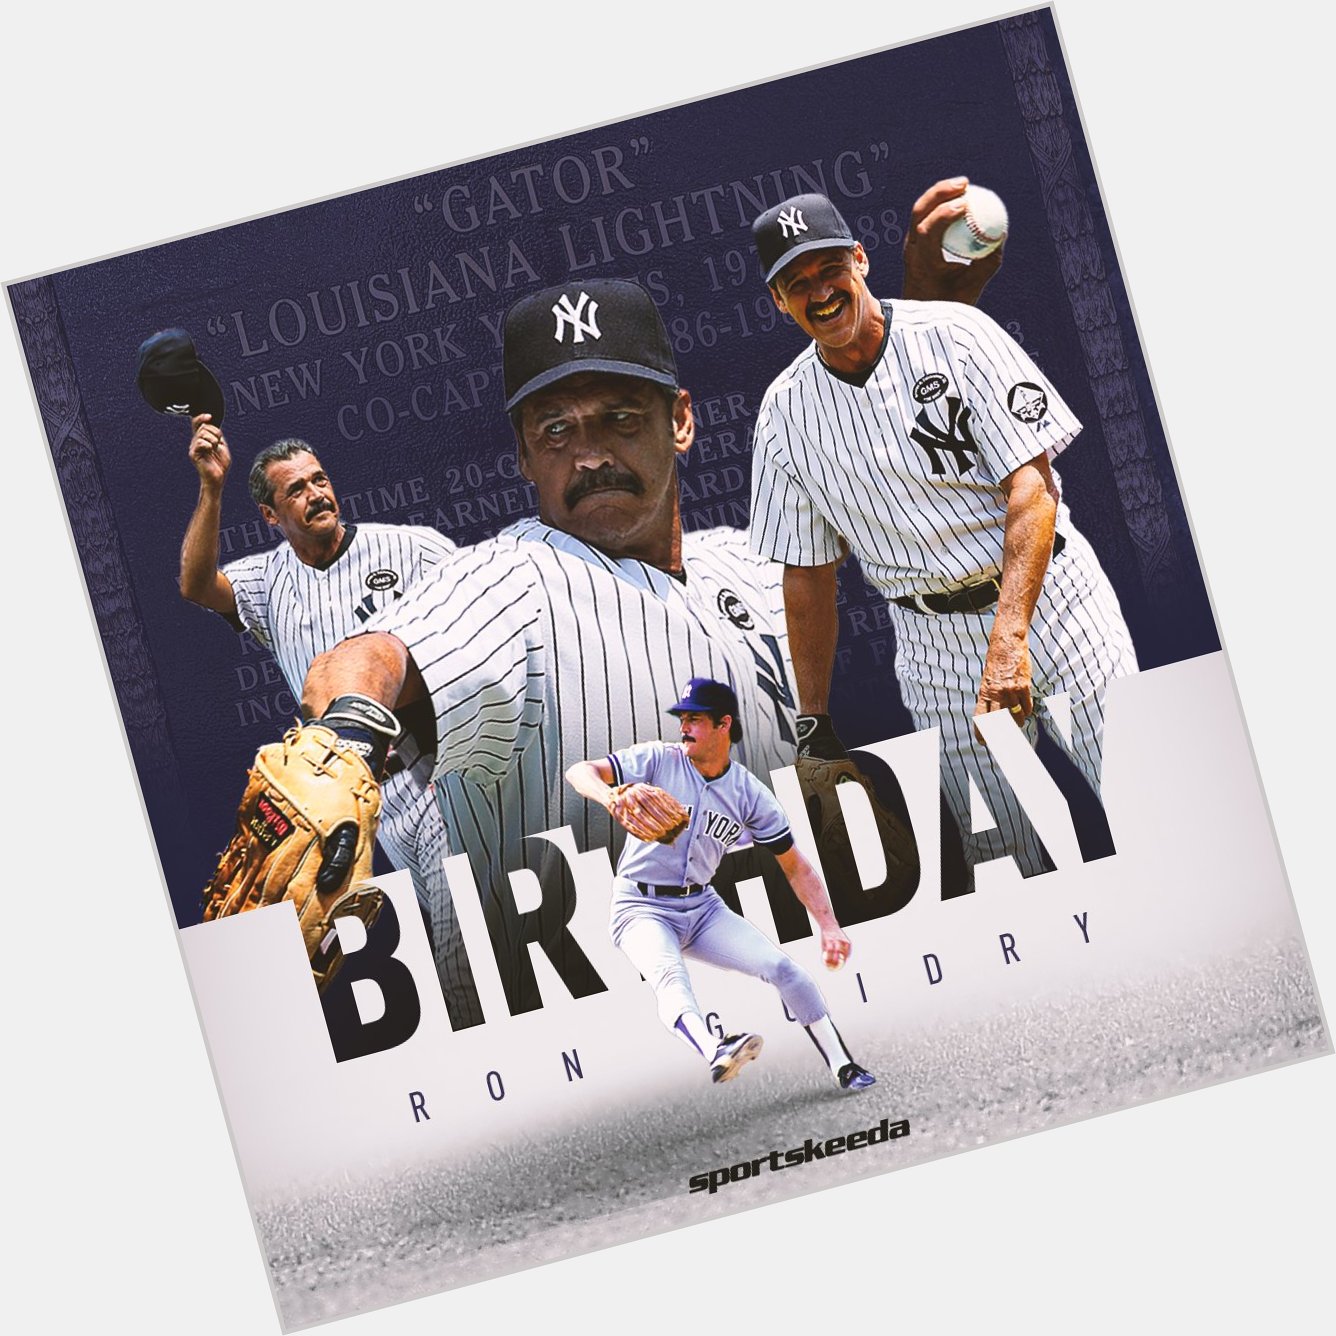 Happy 72nd Birthday to Ron Guidry Cy Young 4x All-Star 2x World Series 5x Gold Glove 2x ERA Title ML PoY 